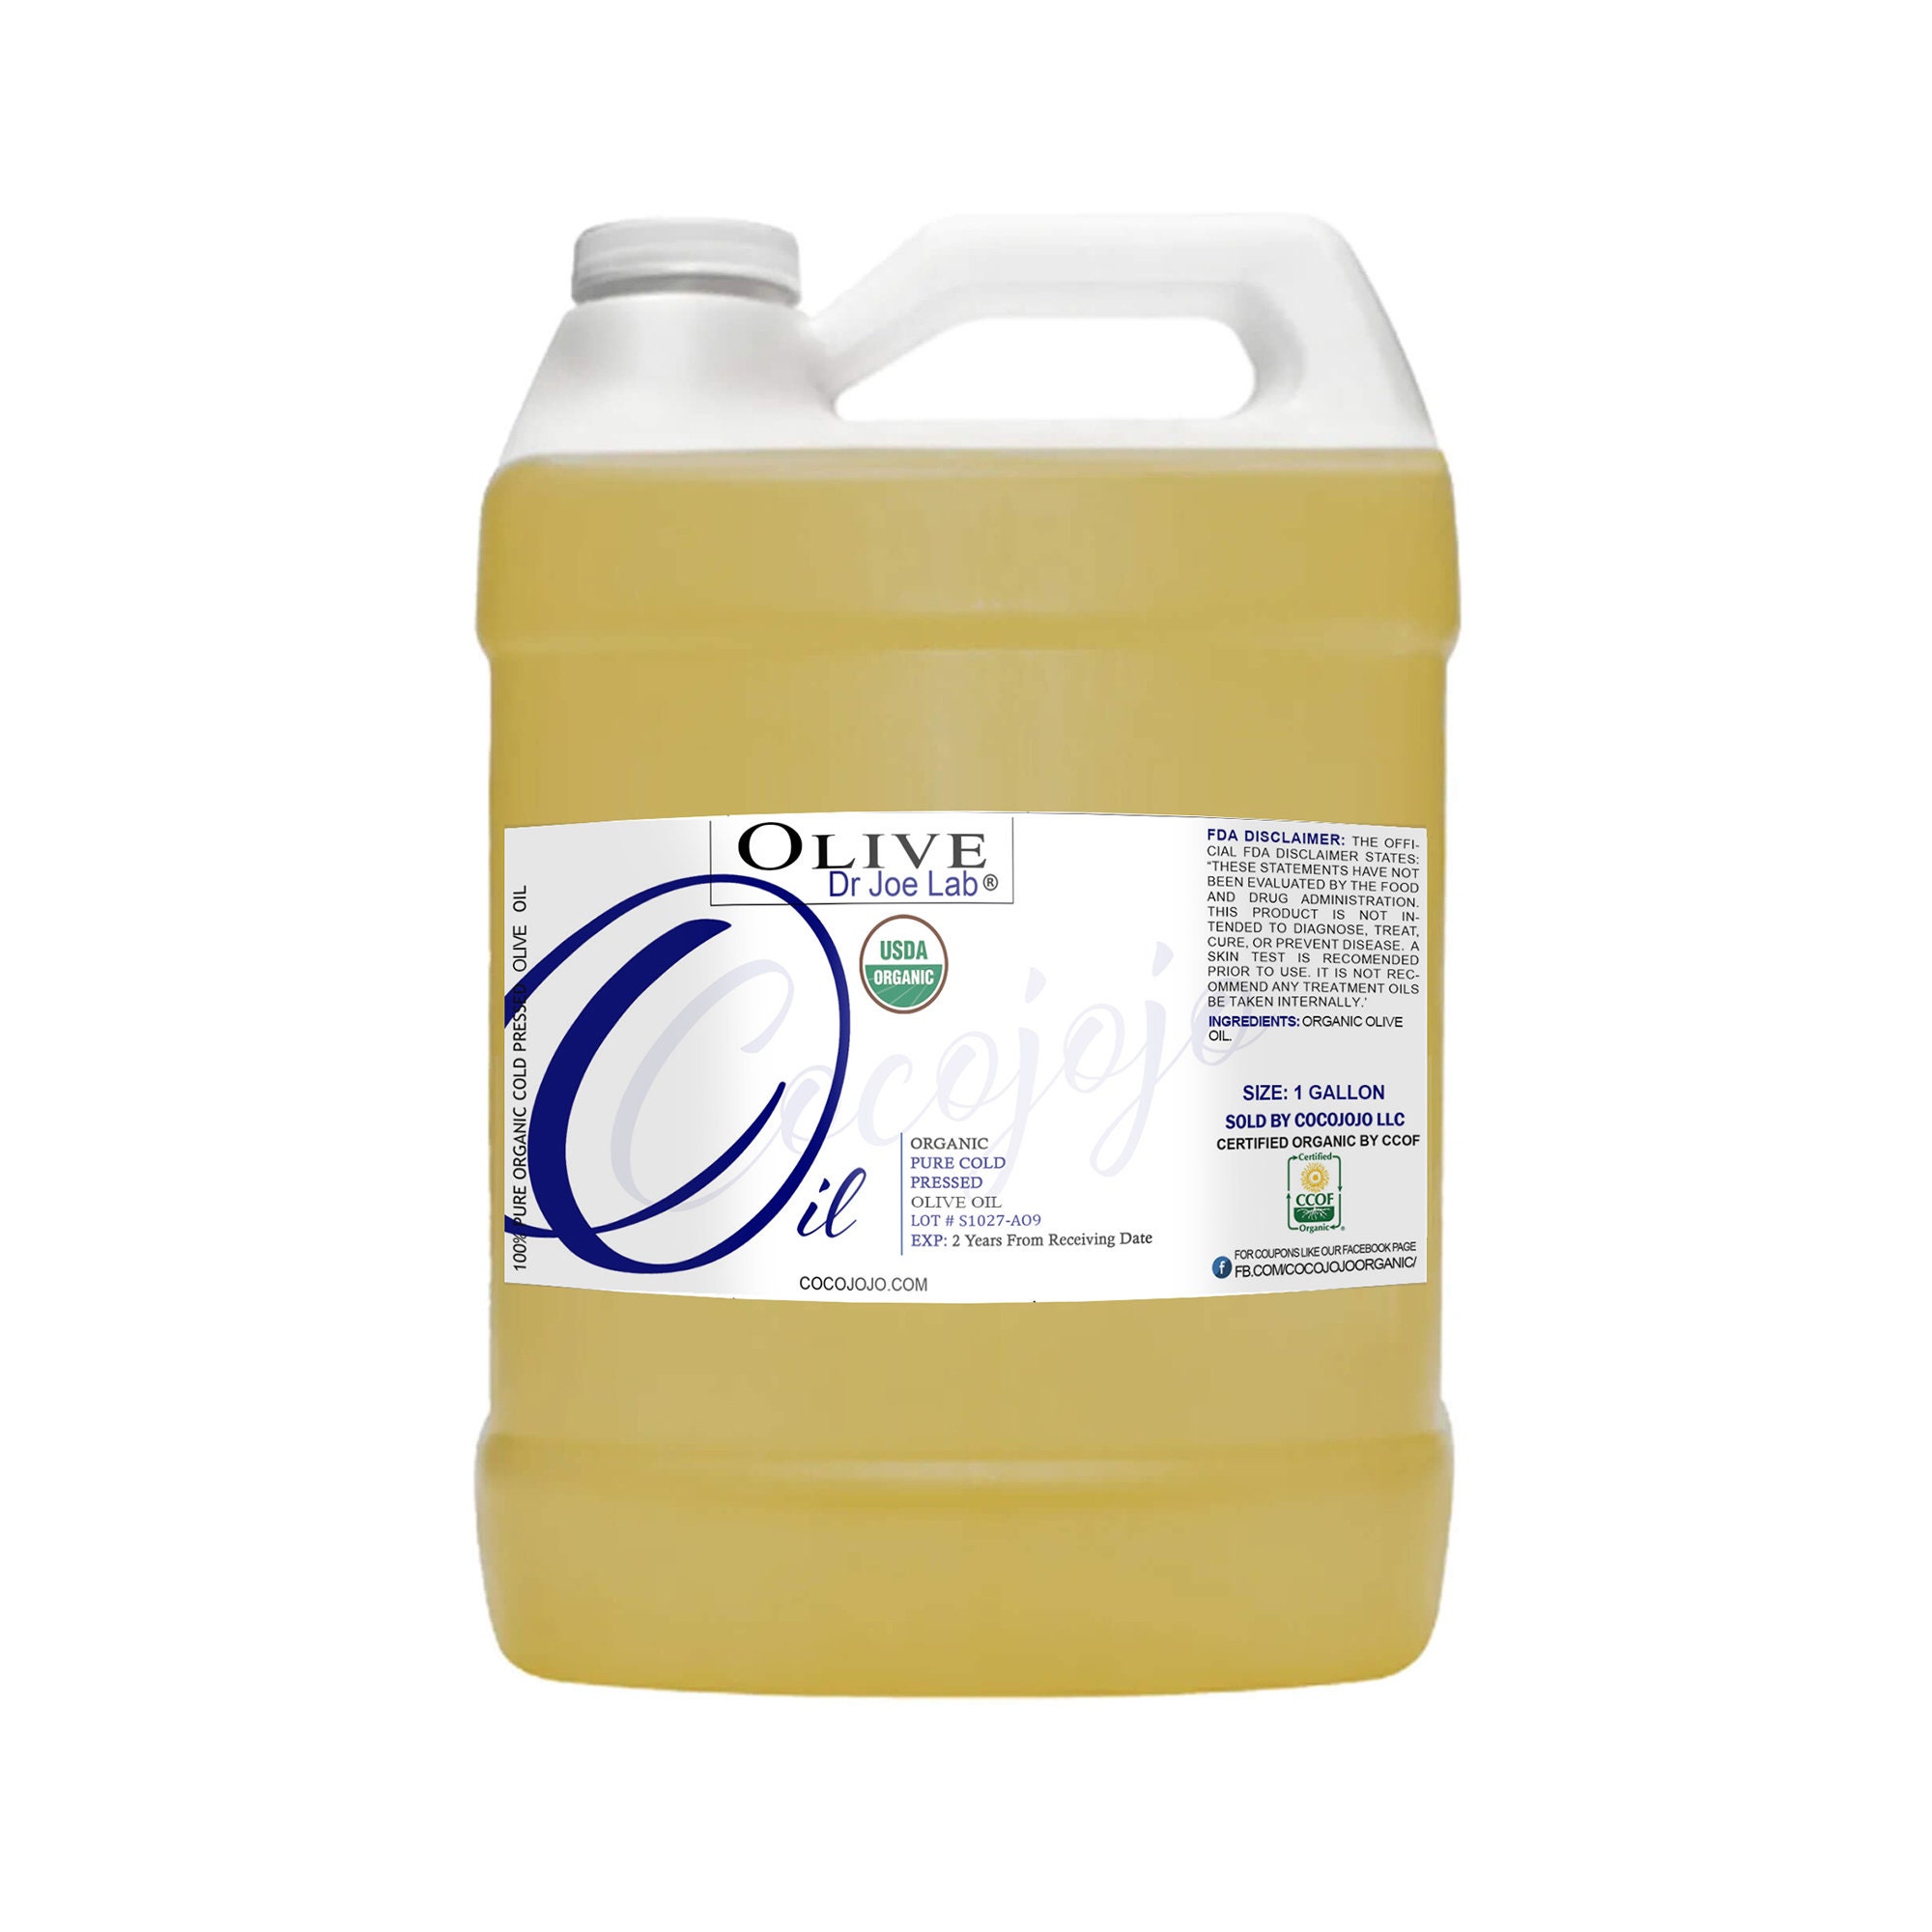 7 Lb, 1 Gal OLIVE OIL Extra VIRGIN Organic Carrier Cold Pressed